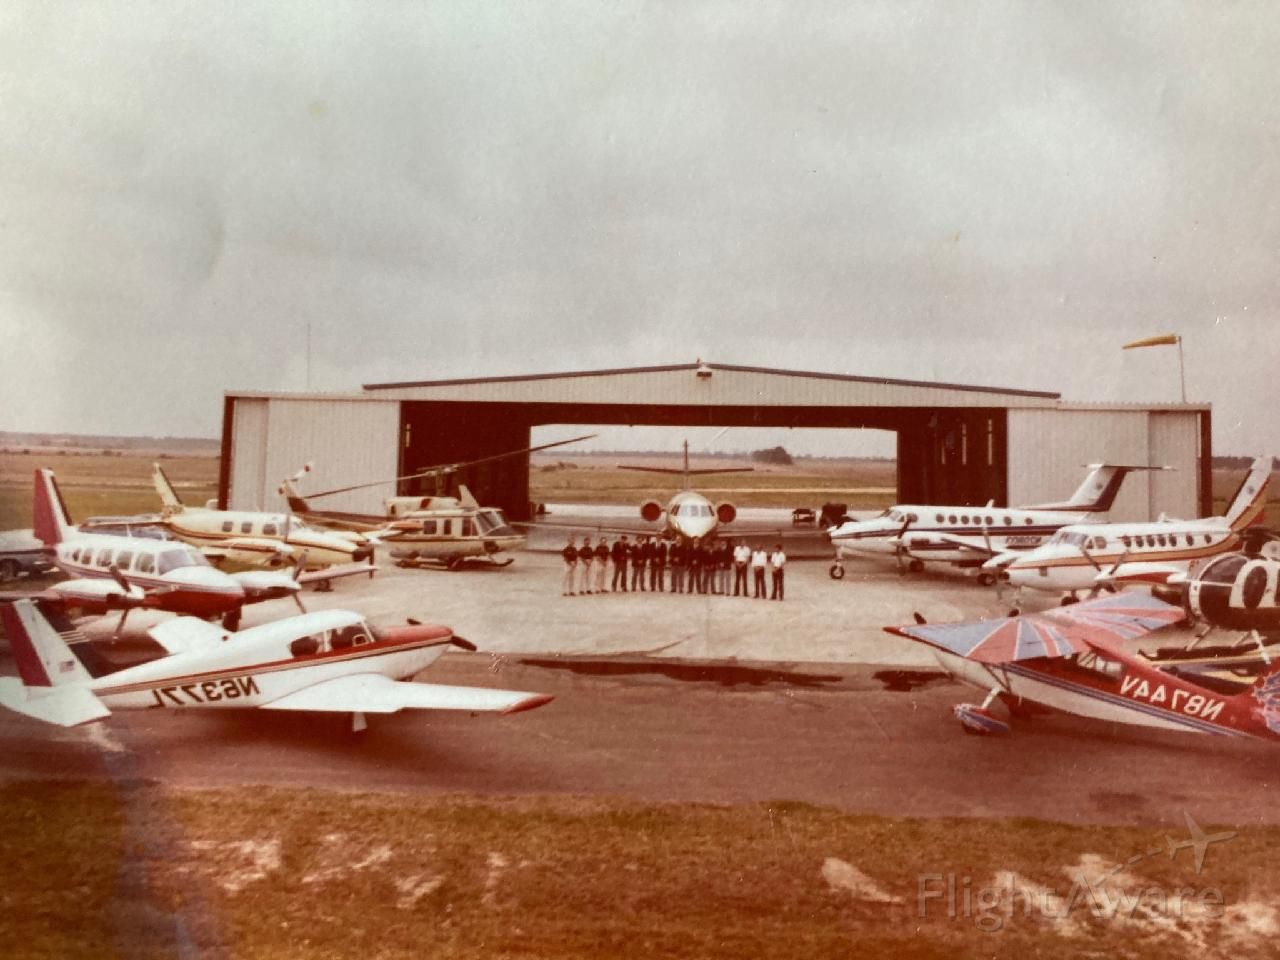 CHAMPION Sky-Trac (N8744V) - Old photo 1976/1977 at Crawford Hanger E-3 KDWH with company pilots and aircraft (image reversed)